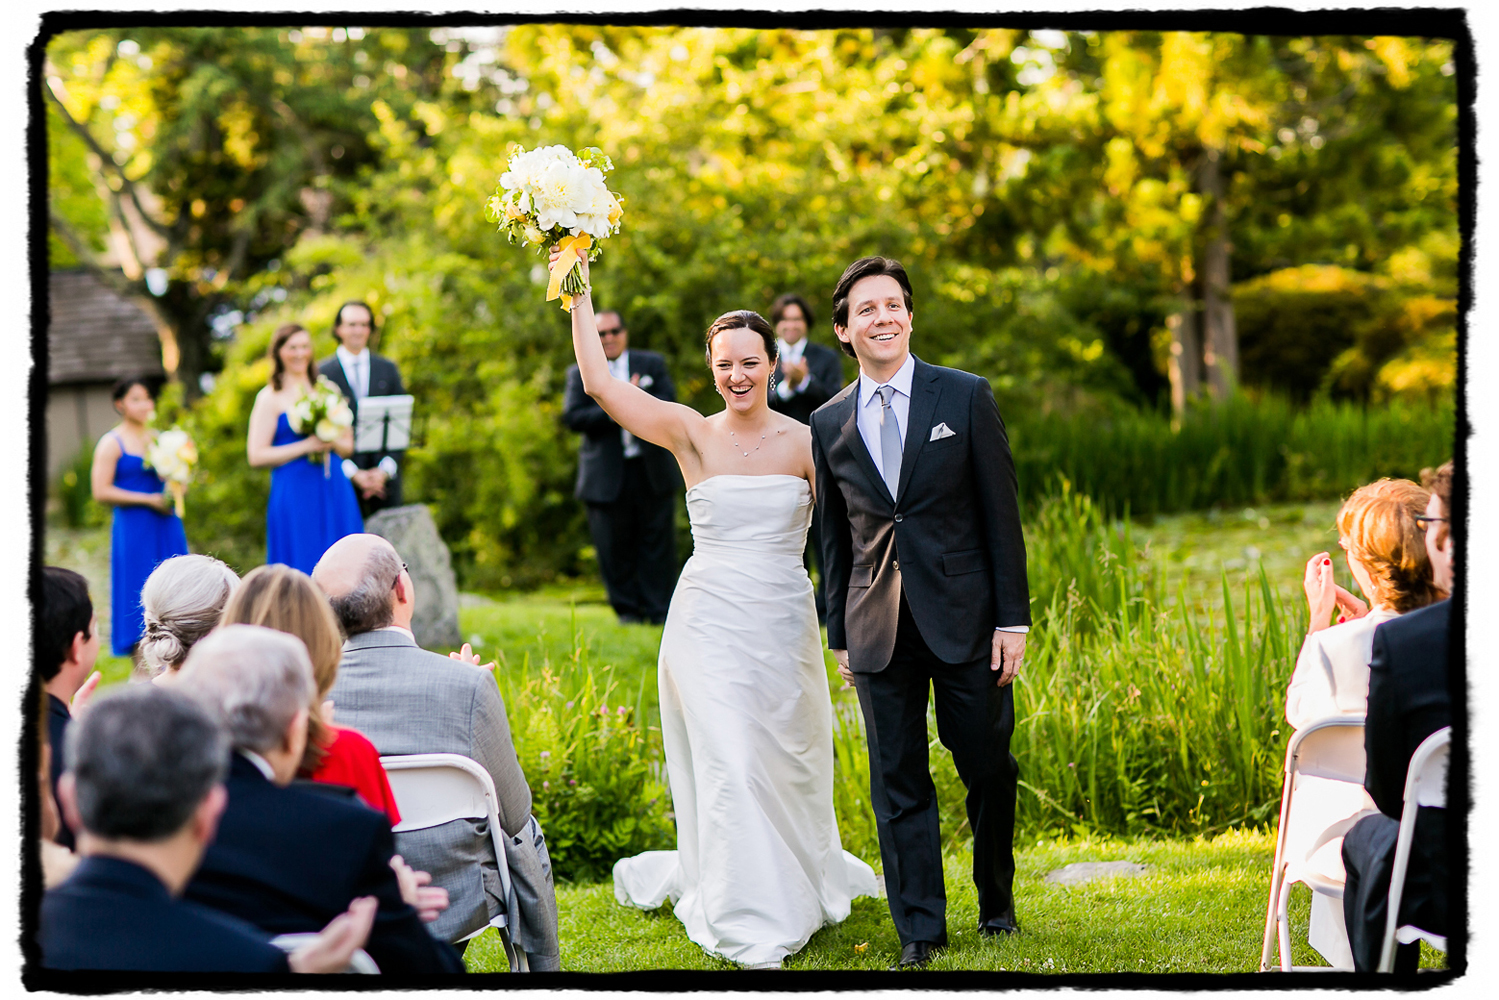 Laura & Axuve tied the knot at The Hammond Museum and Japanese Stroll Garden.